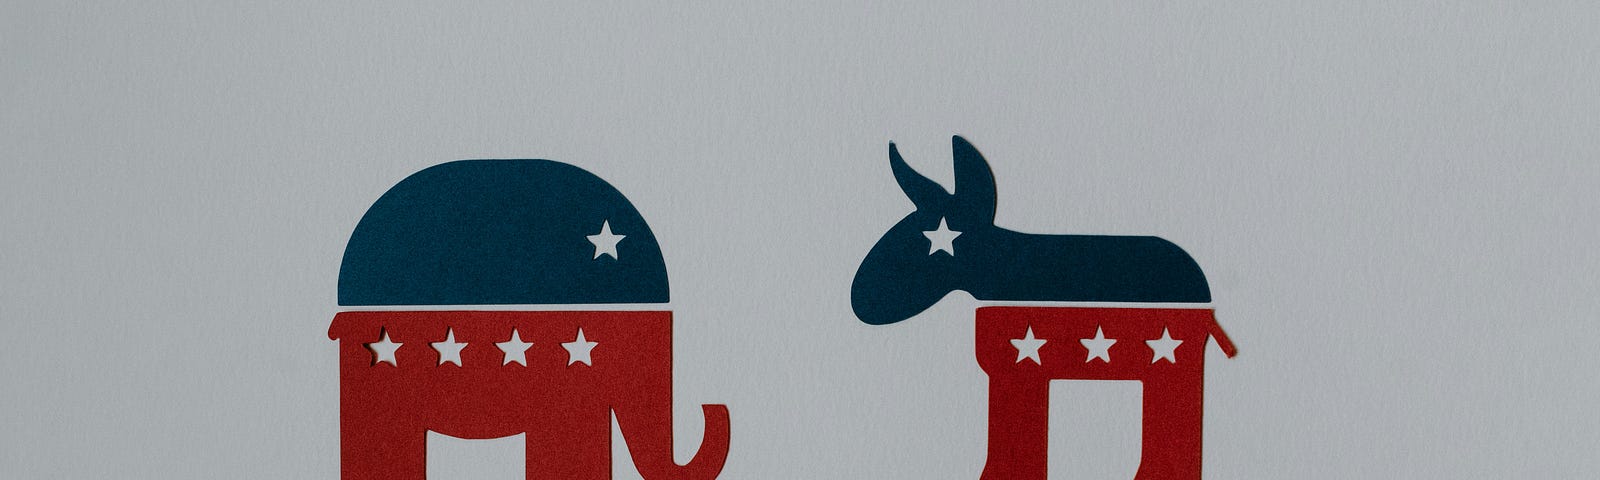 An image of the Republican elephant and Democrat donkey